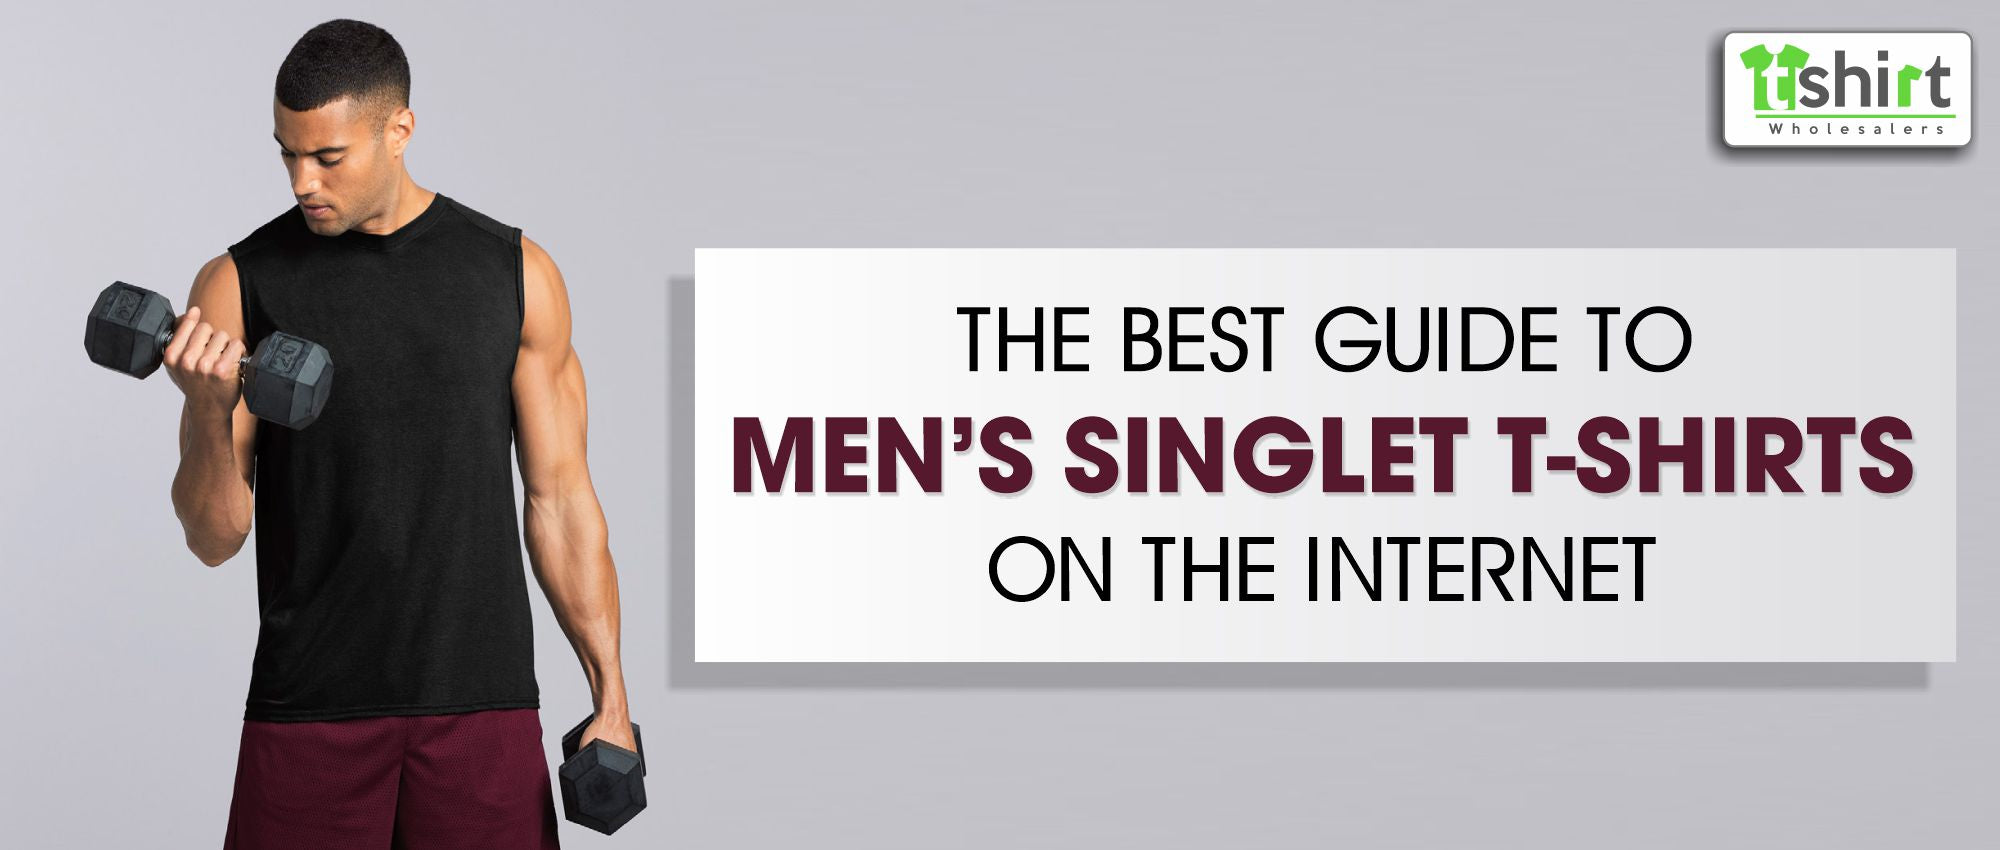 THE BEST GUIDE TO MEN’S SINGLET T-SHIRTS ON THE INTERNET